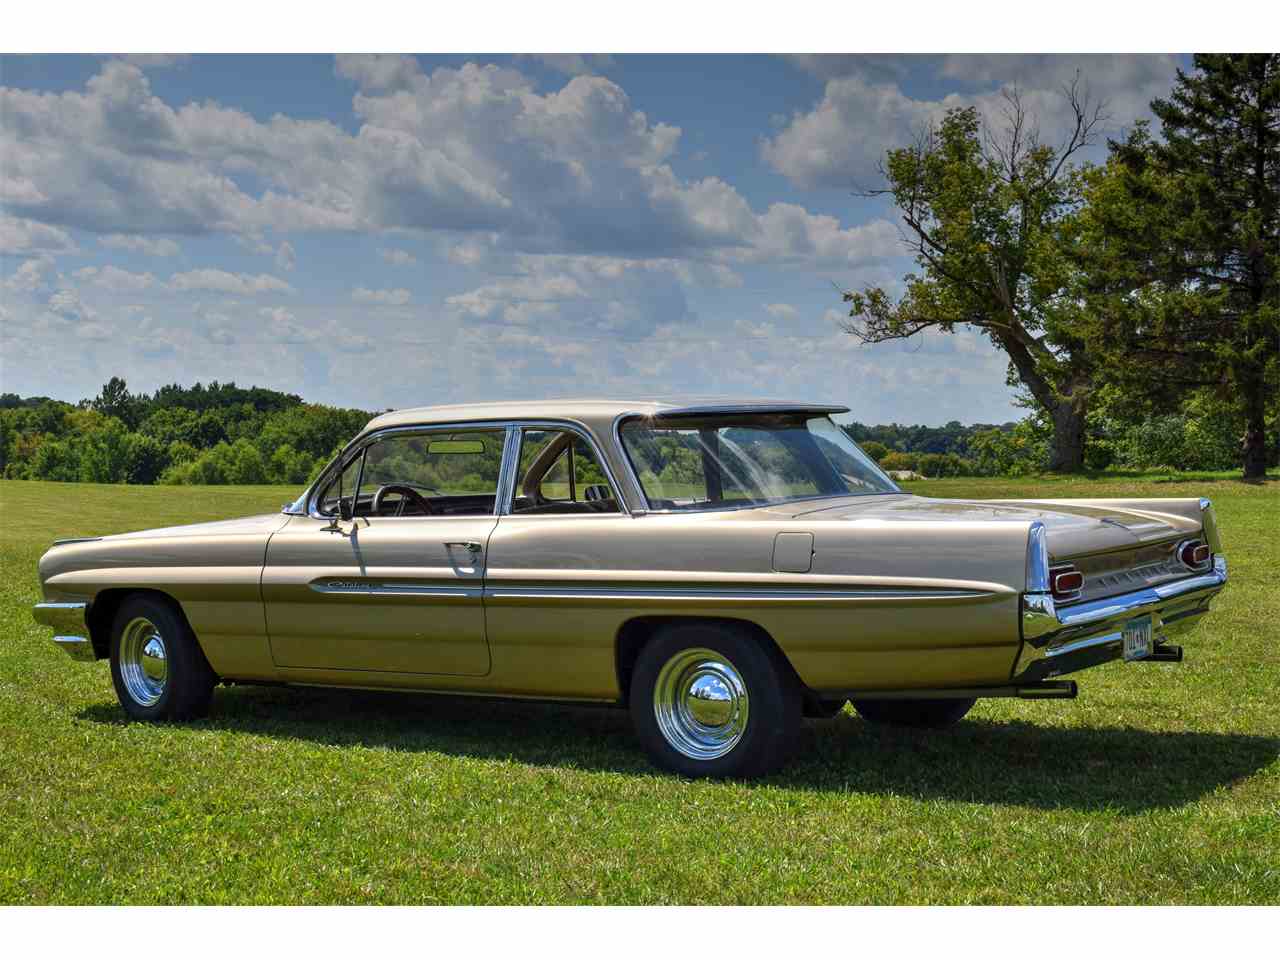 1961 Pontiac Catalina For Sale Classiccars Cc 1011720 for Classic Cars Watertown Mn